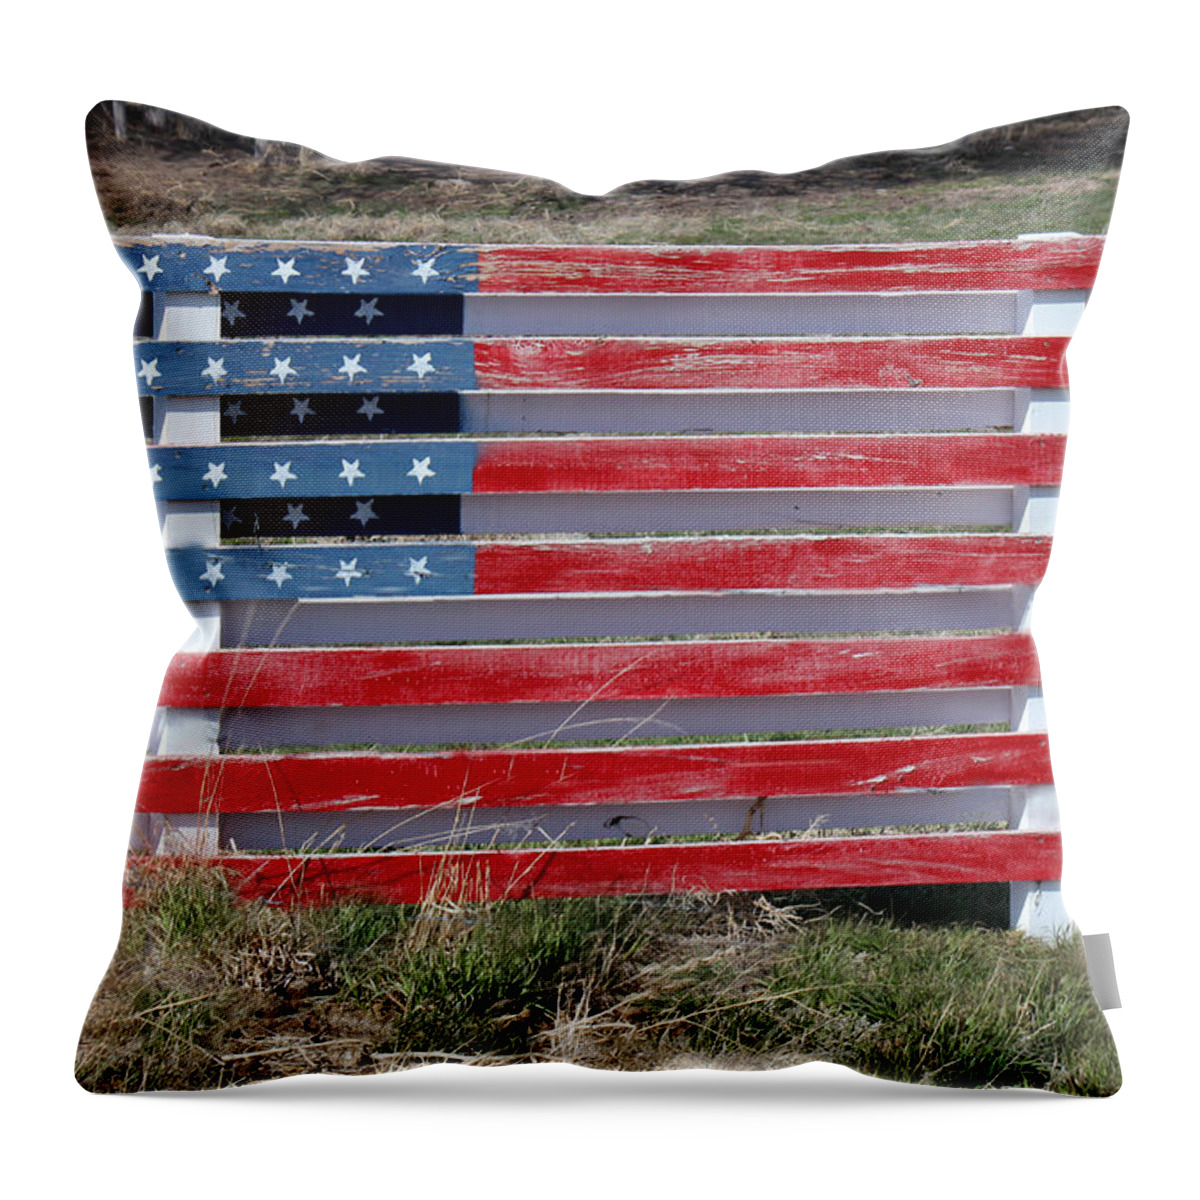 Americana Throw Pillow featuring the photograph American Flag Country Style by Sylvia Thornton